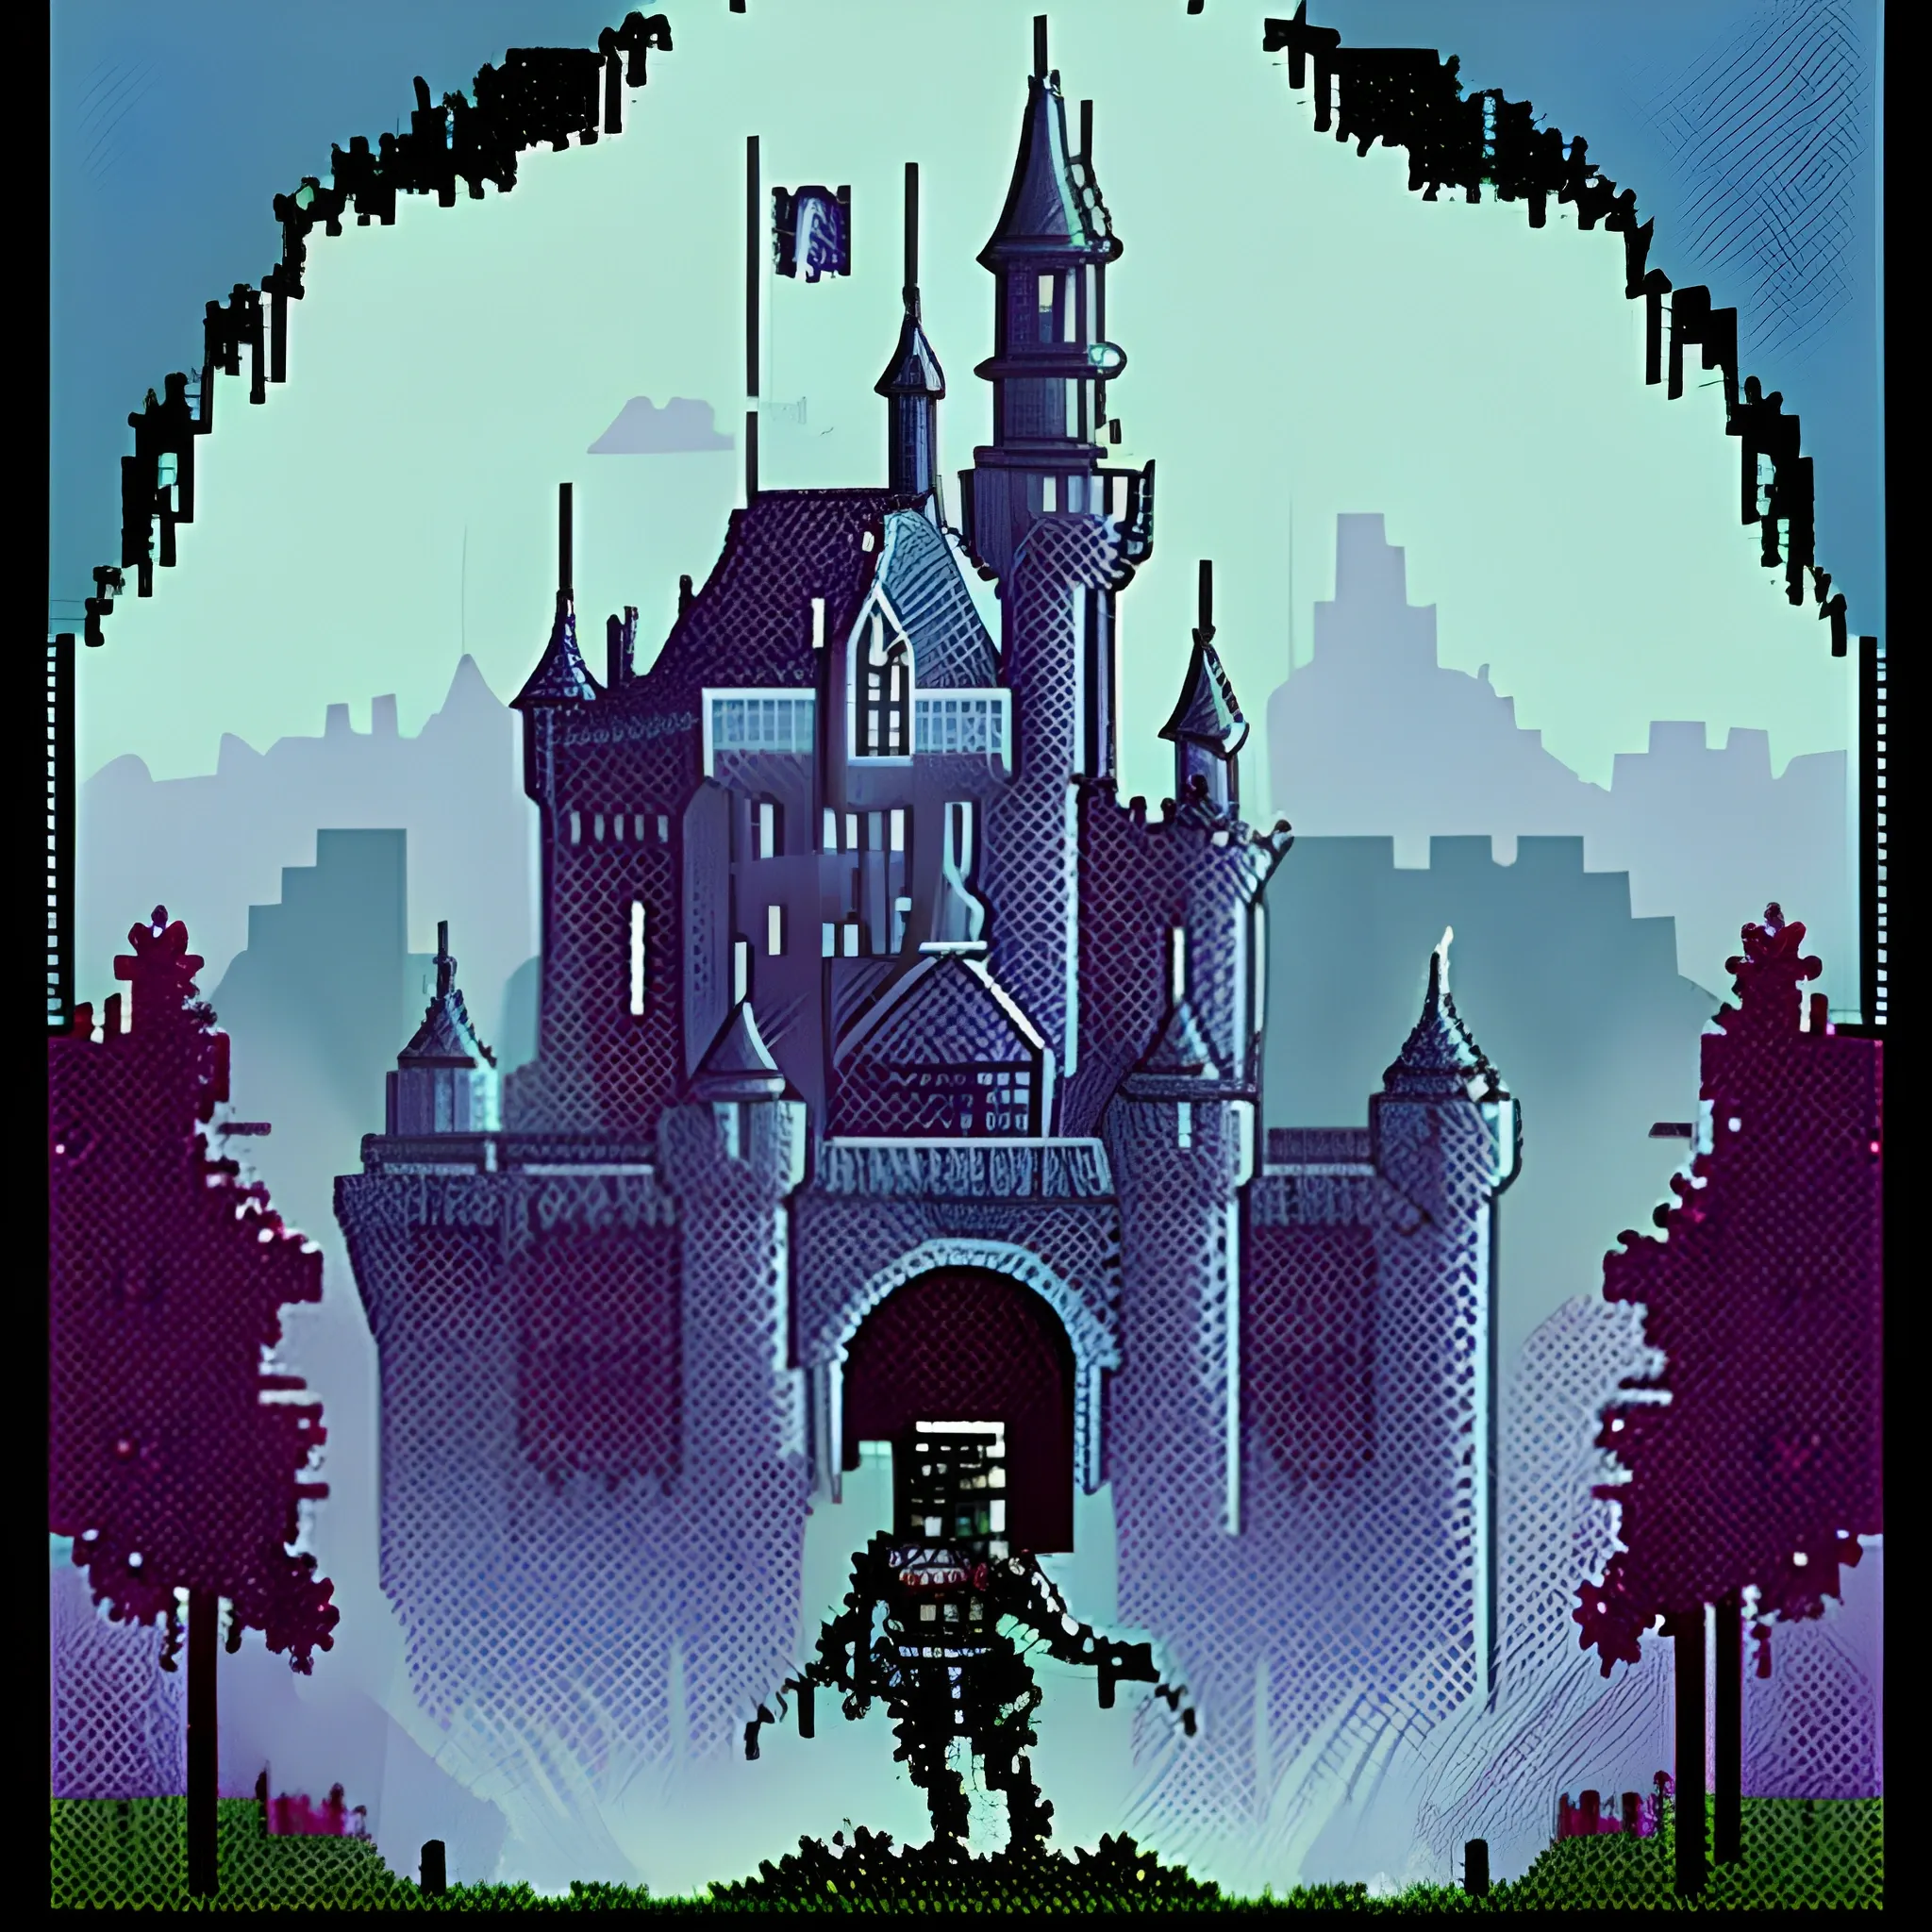 80s dark fantasy pixel knight dying  with castle in background

